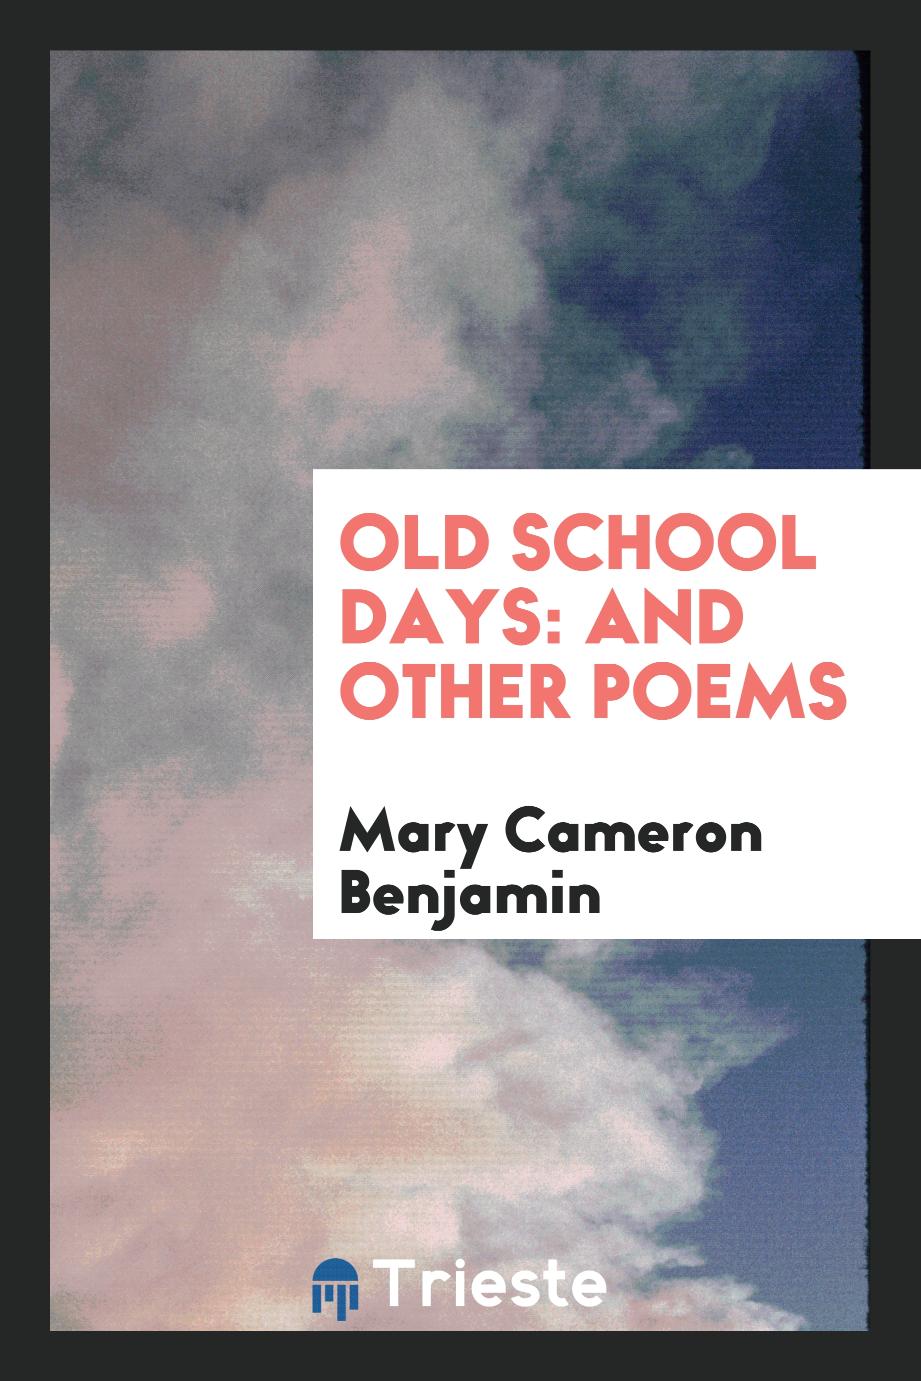 Old School Days: And Other Poems